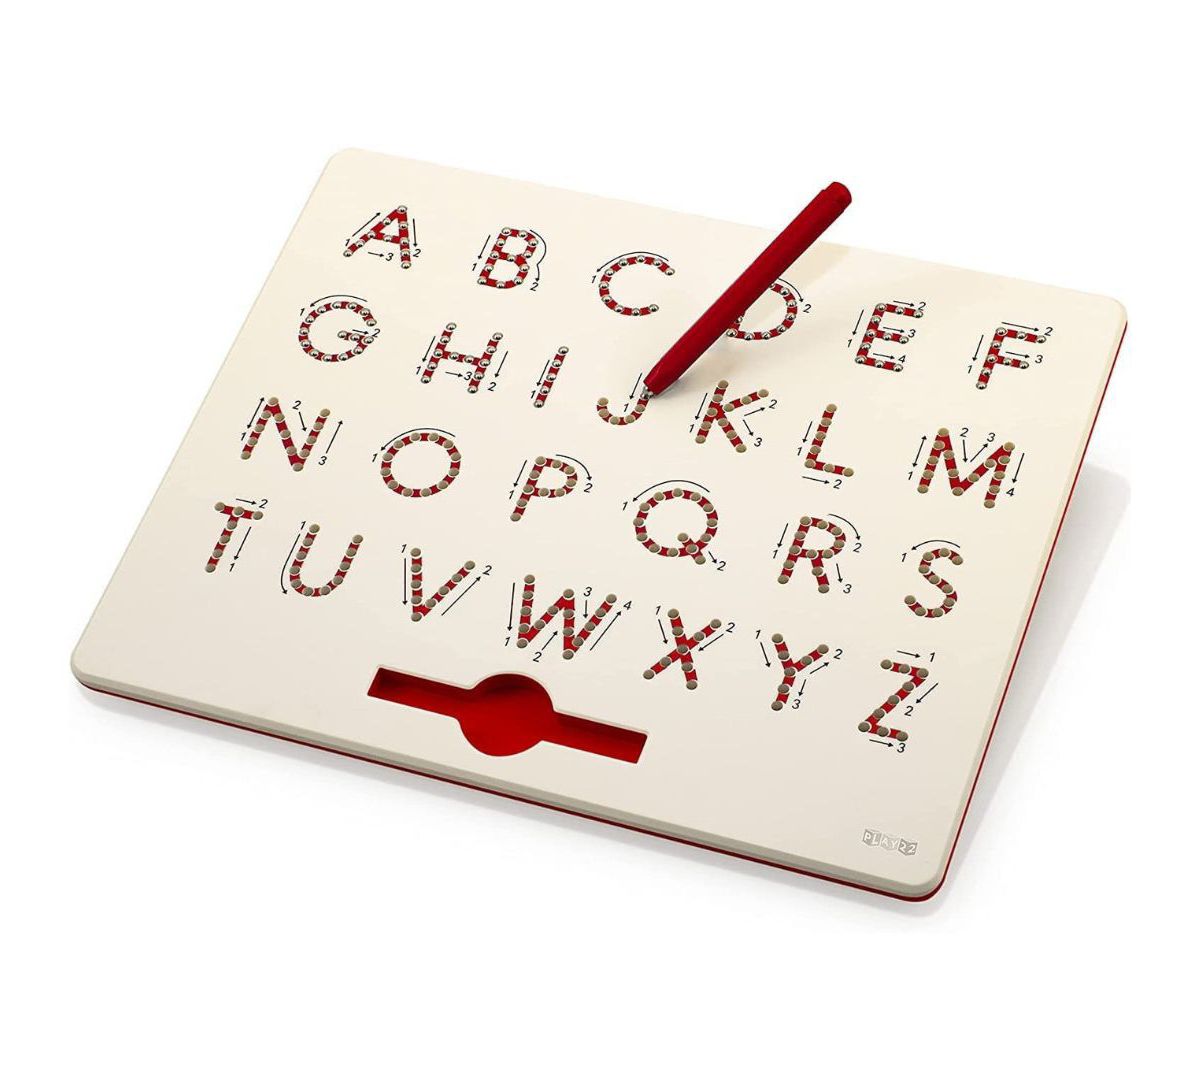 Magnetic Drawing Board - Educational Learning ABC Letters Kids Drawing Board Includes A Pen Play22